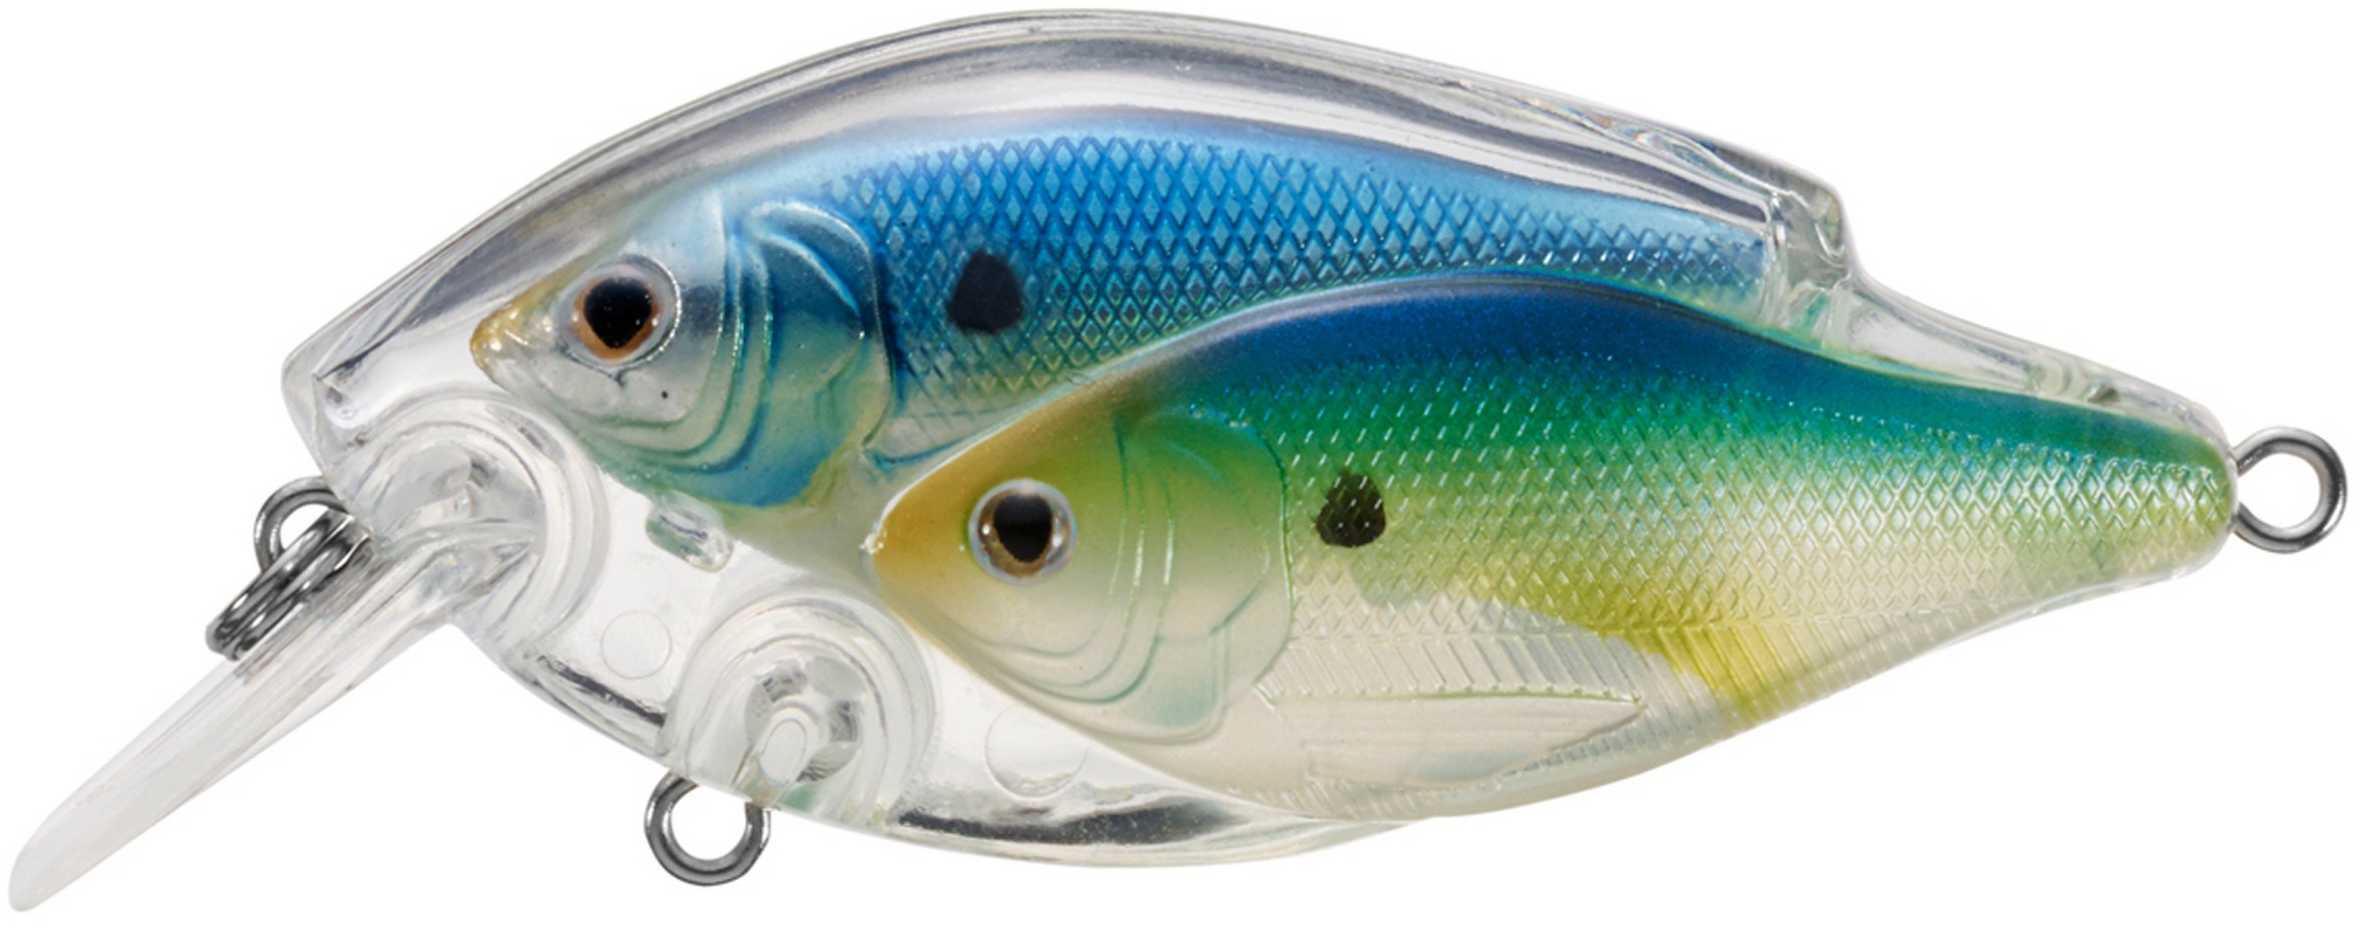 LIVETARGET Lures / Koppers Fishing and Tackle Corp Usa Baitball Threadfin Cb 1/2Oz 2 3/8In 3-5Ft Prl/Blue/C TSB60S-806